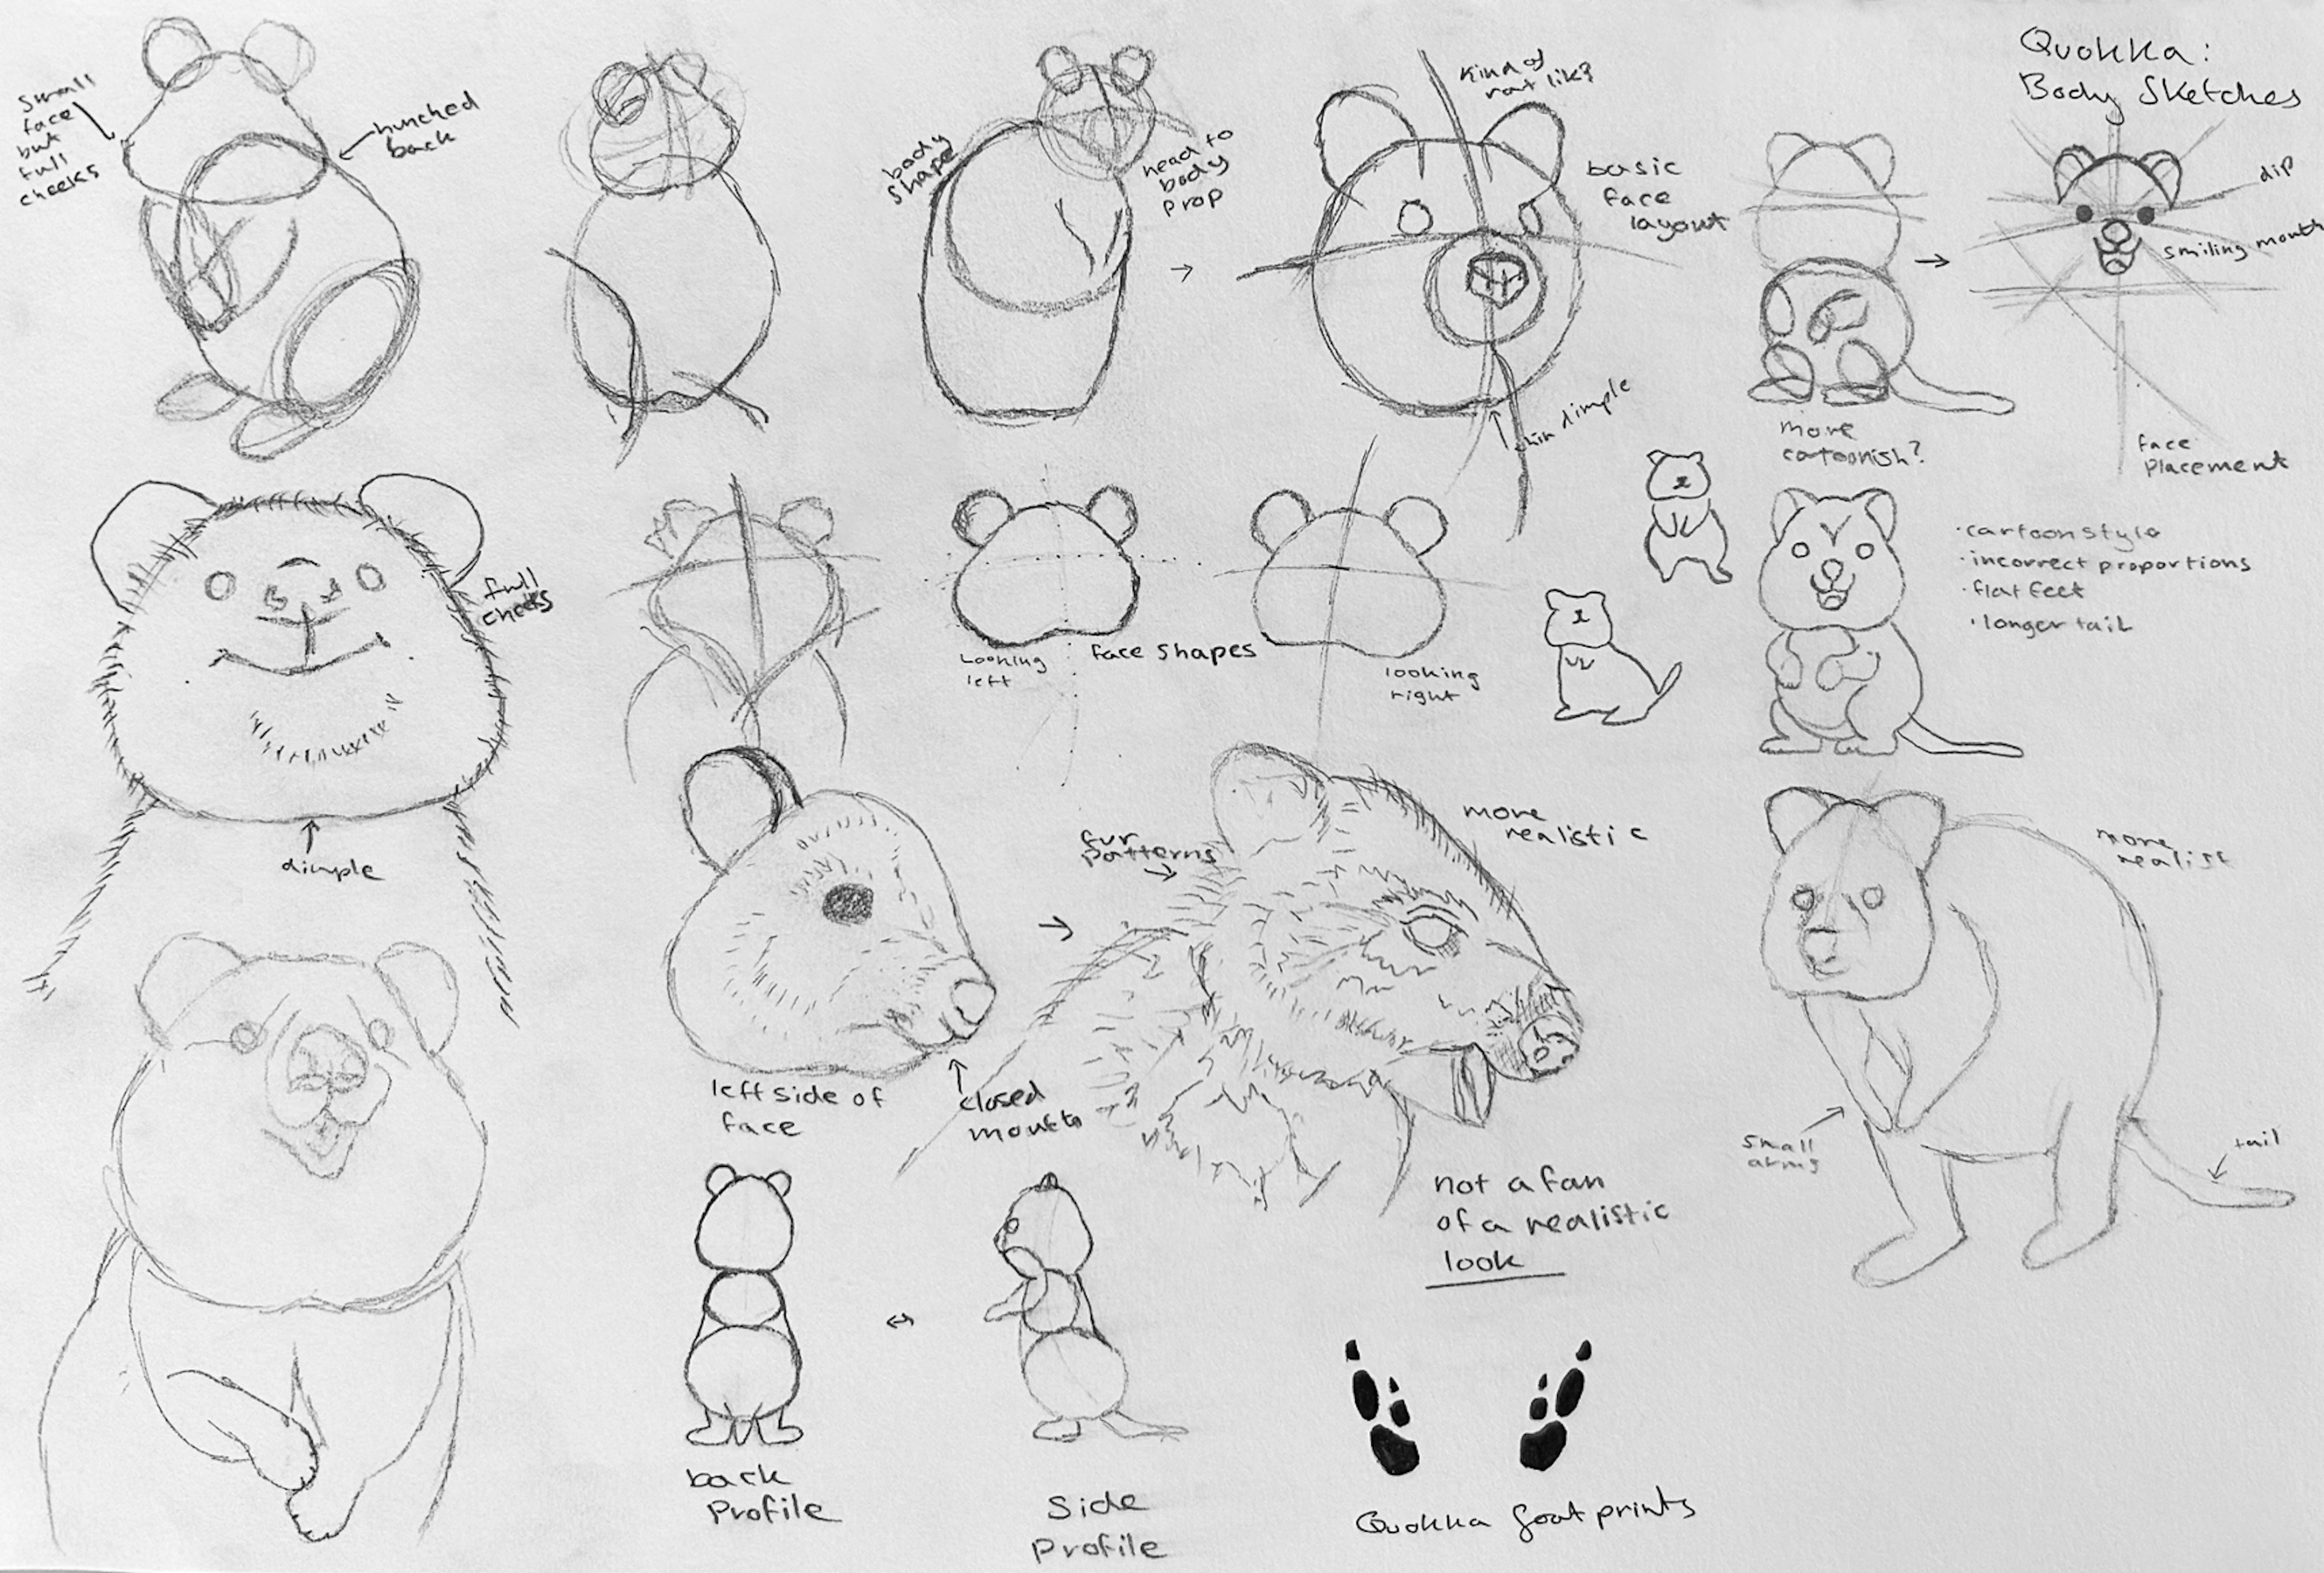 Multiple sketches capturing various facial expressions and positions from different angles, inspired by wildlife photography of the adorable quokka. These sketches aided in comprehending the small proportions and distinctive head shape of the quokka.